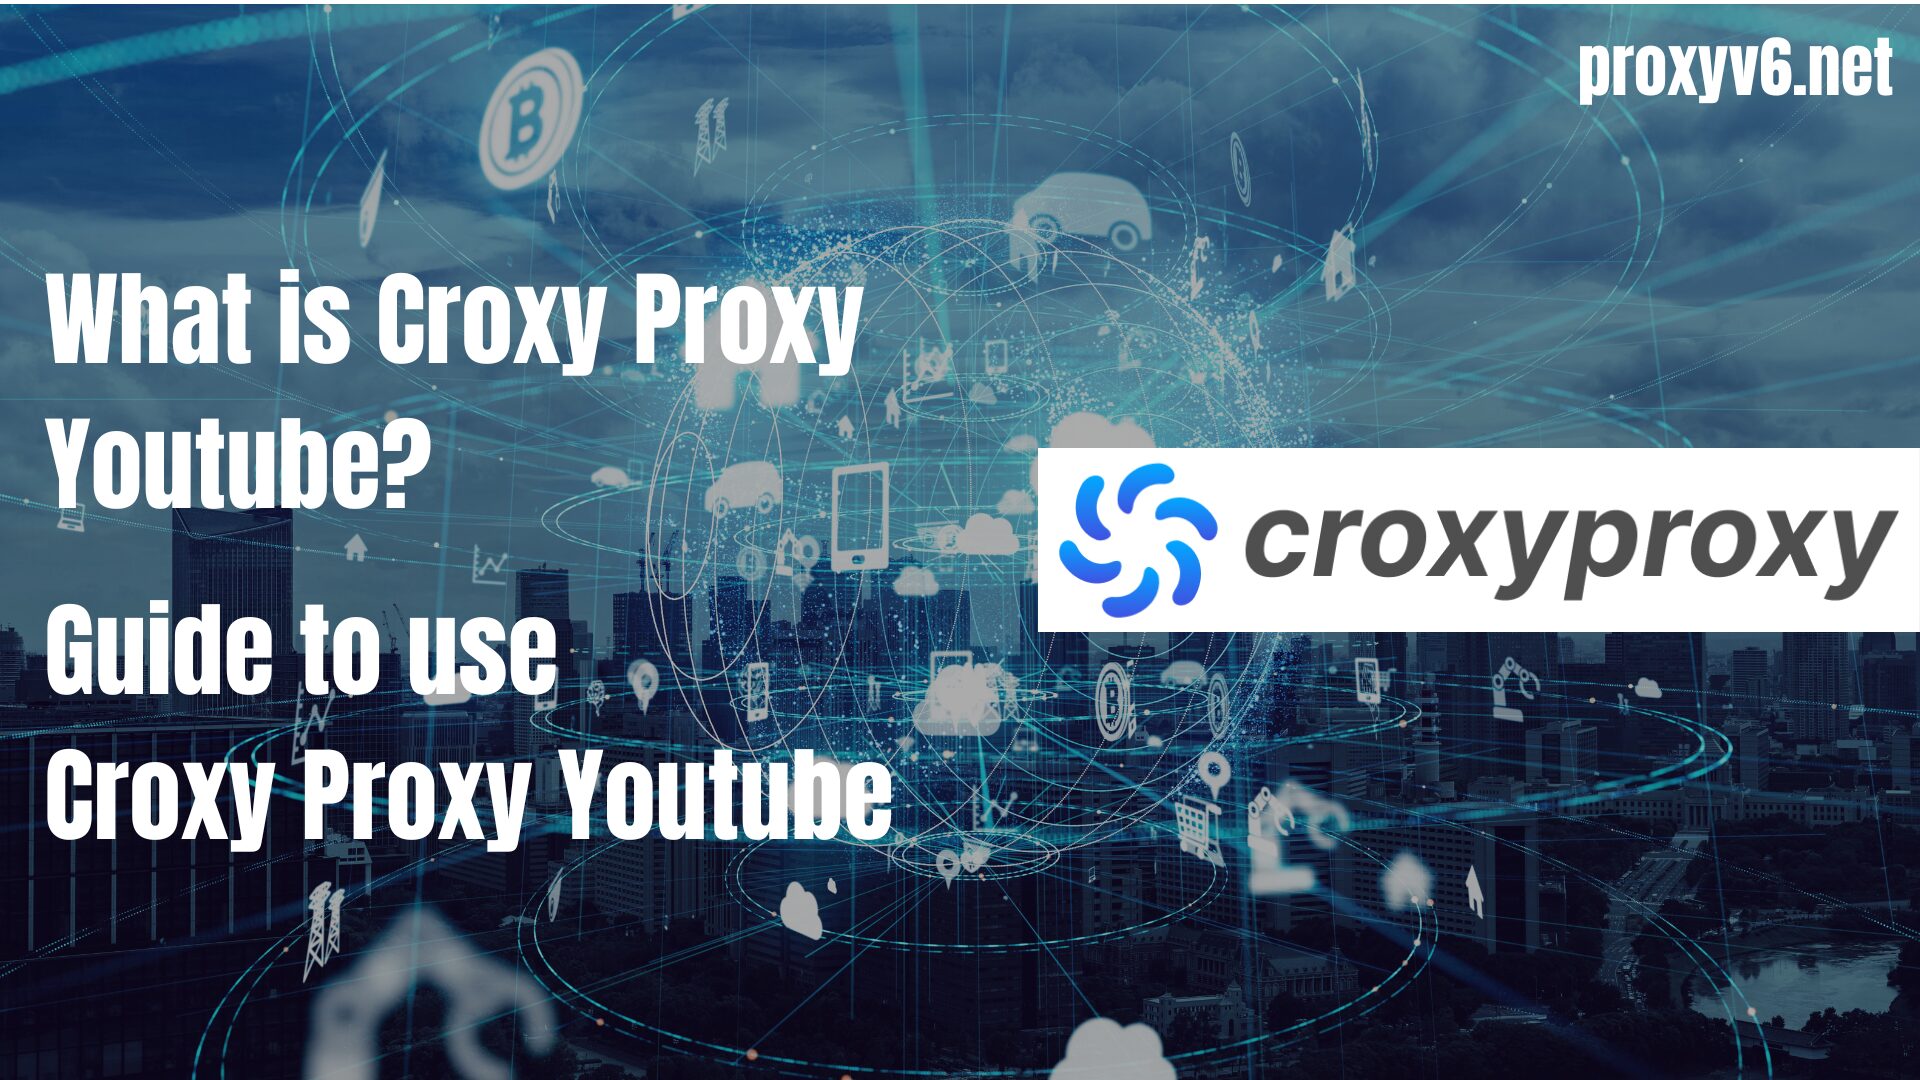 What is Croxy Proxy YouTube? Guide to use YouTube Croxy Proxy